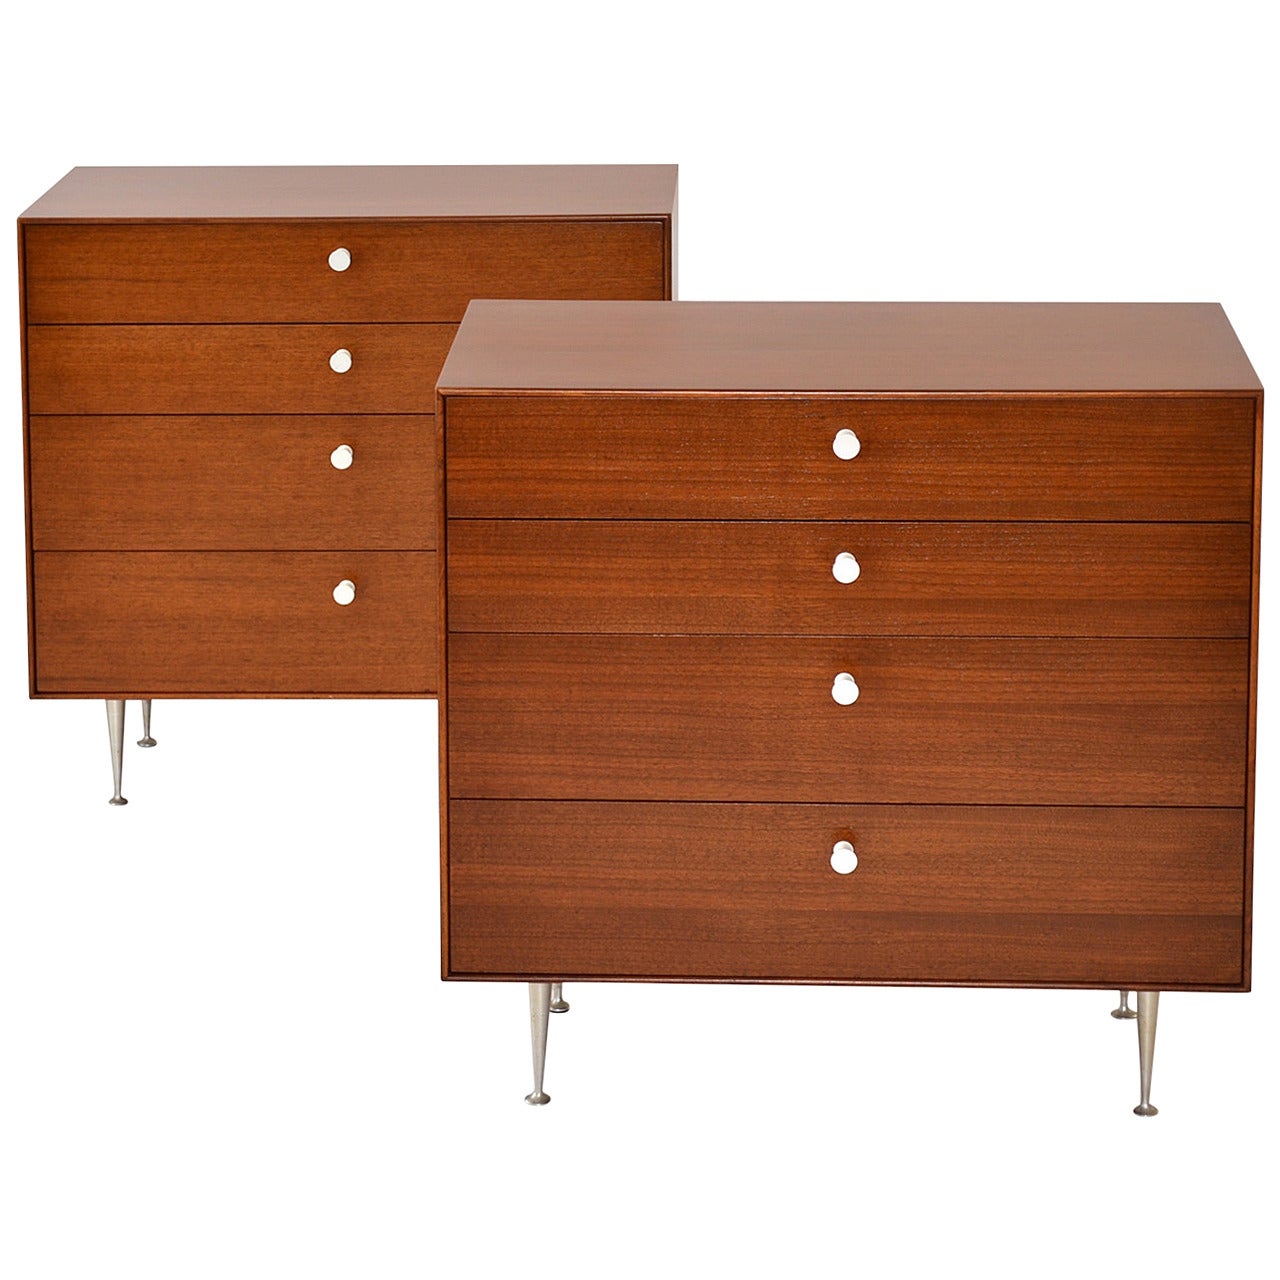 Pair of Thin Edge Chests by George Nelson for Herman Miller